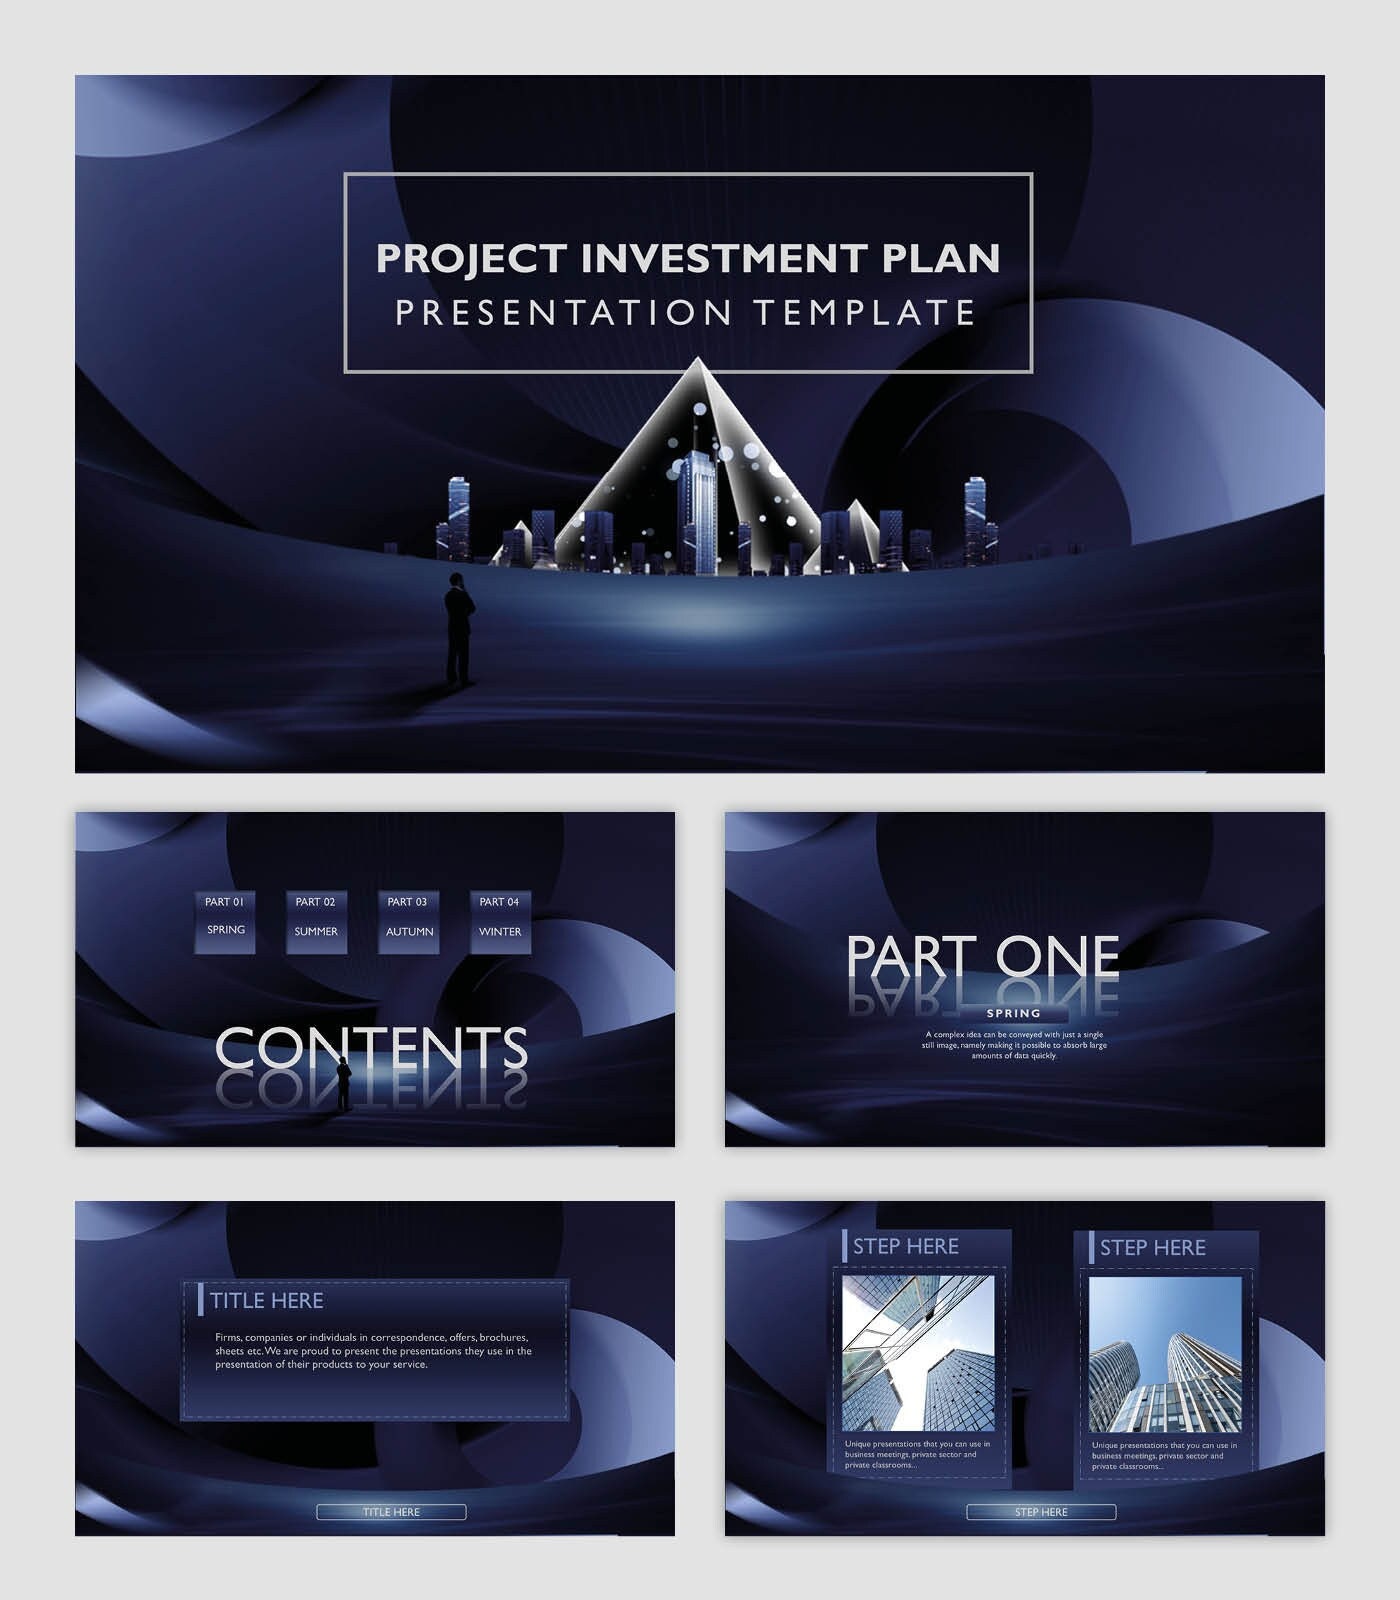 Project Investment Plan Powerpoint Template photo photo